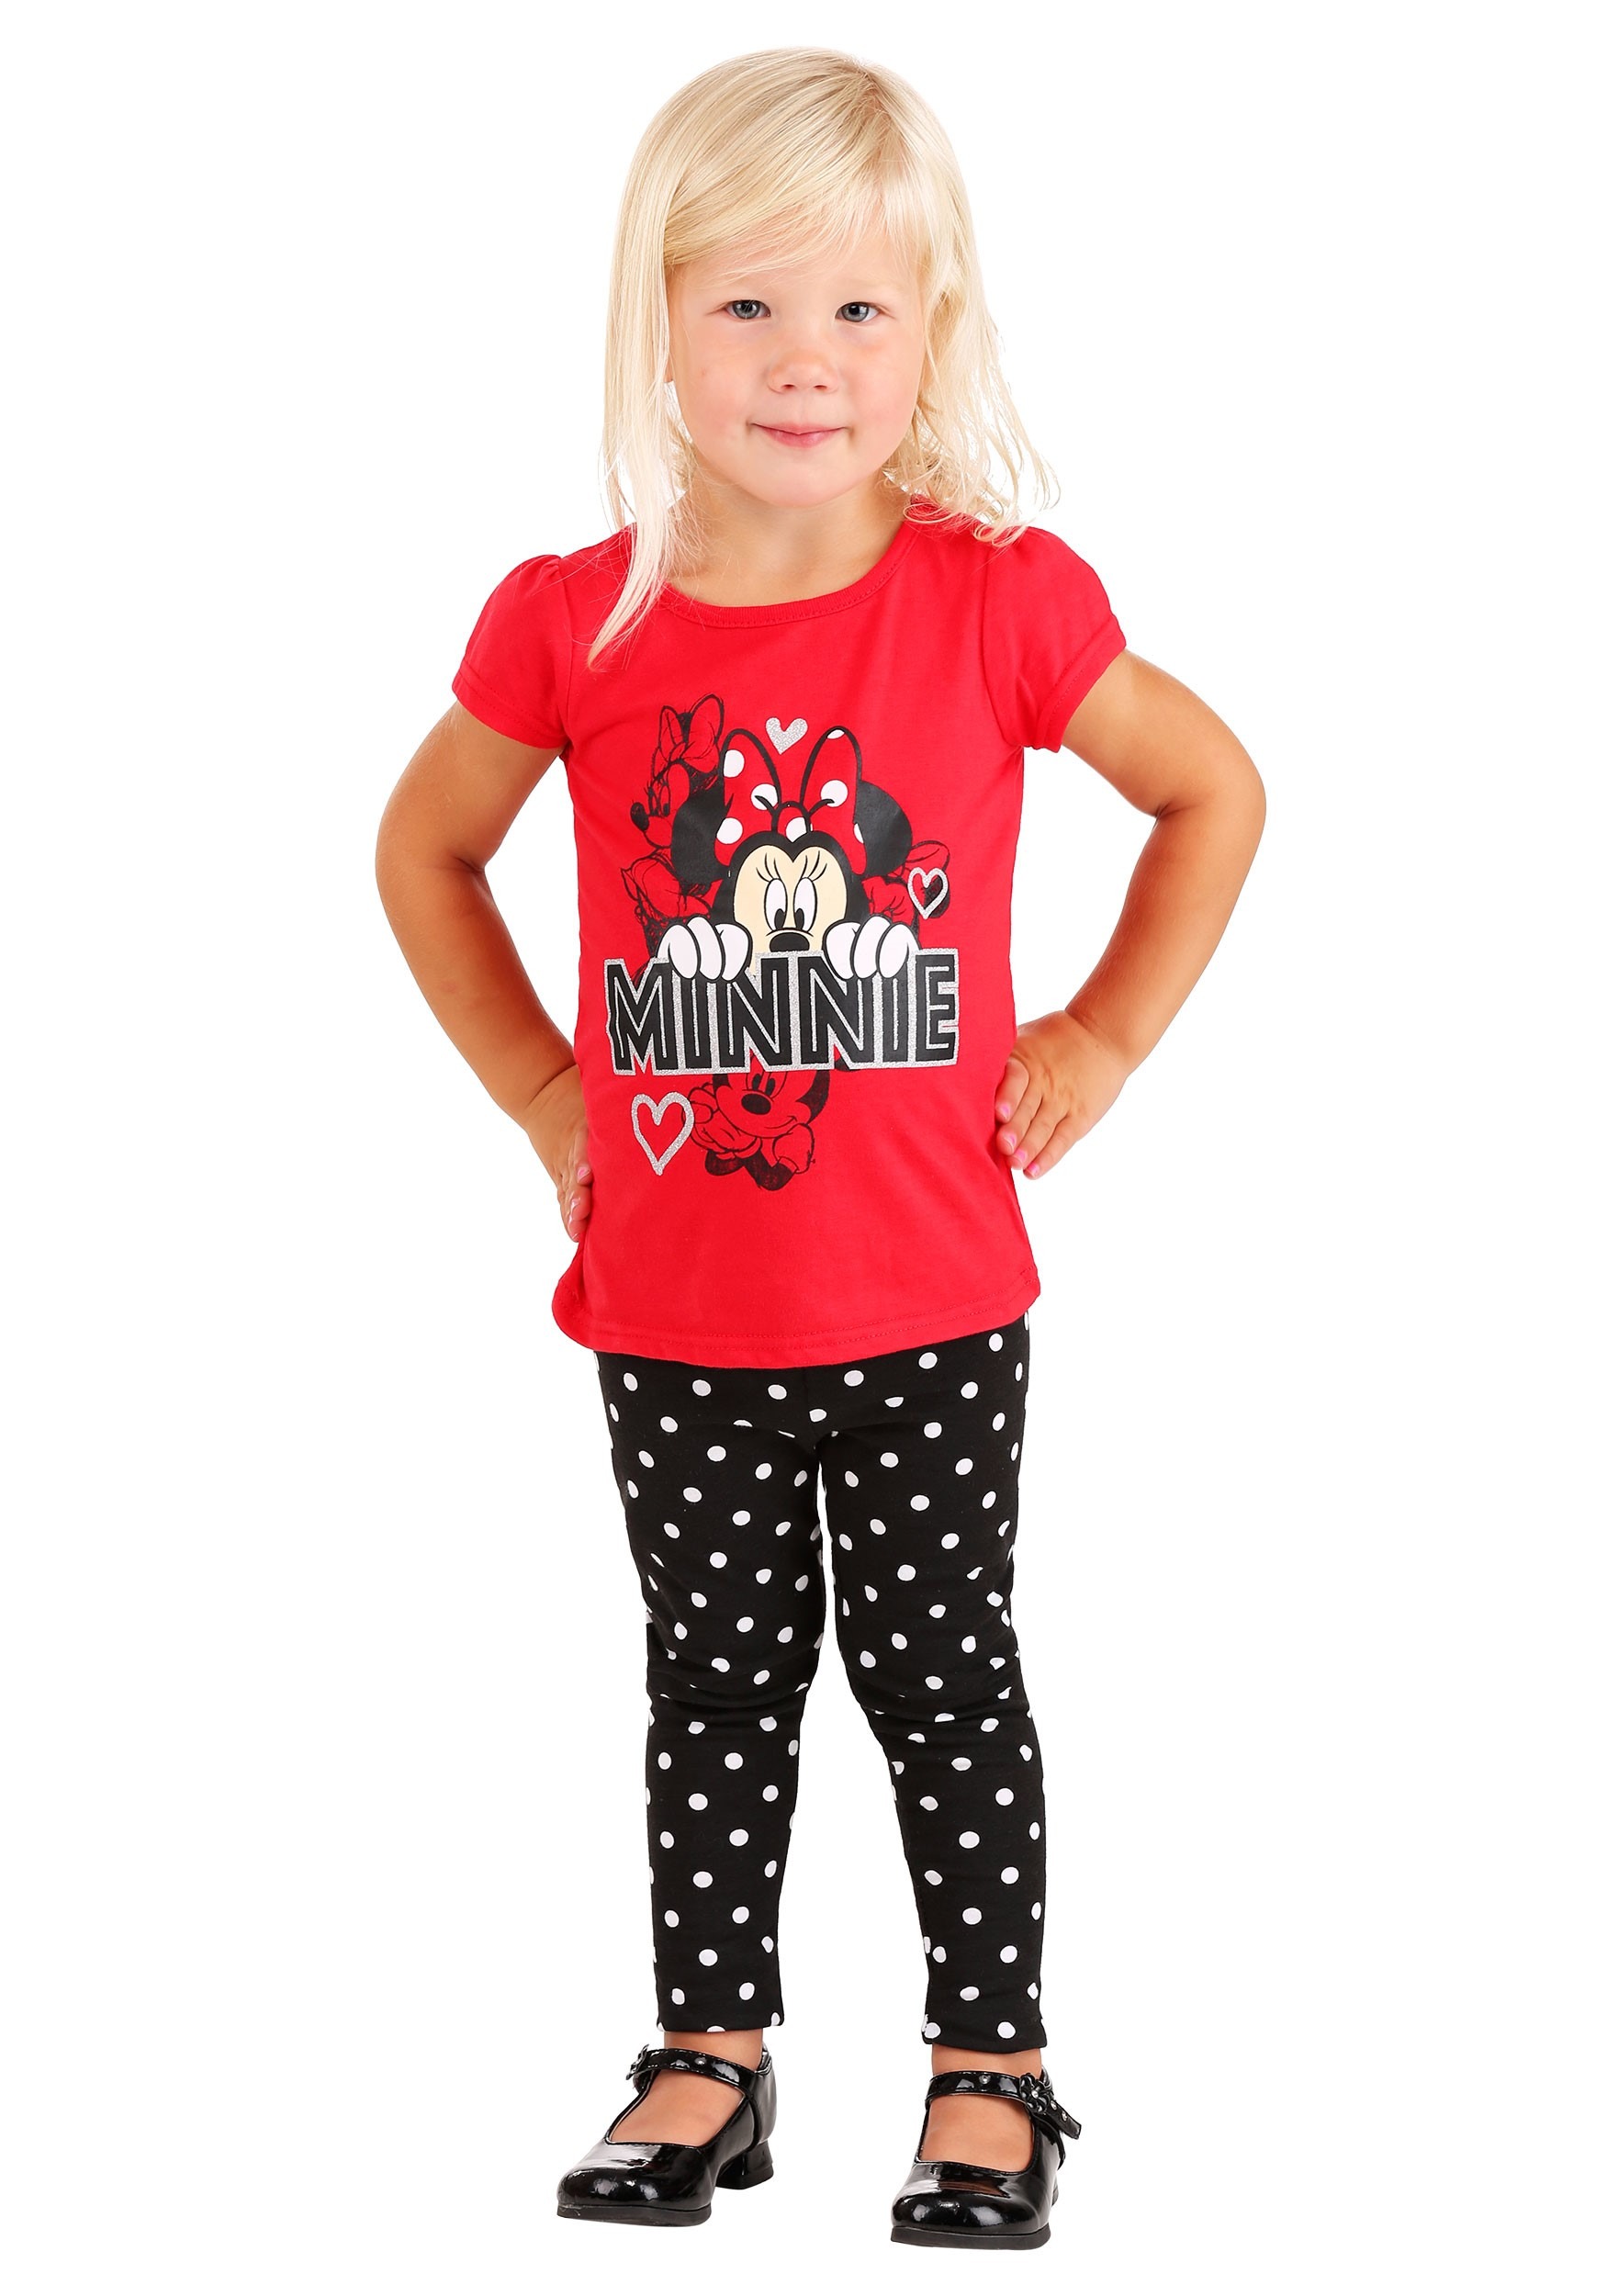 2 PC Minnie Mouse Red Shirt/Polka Dot Leggings Set for Toddlers